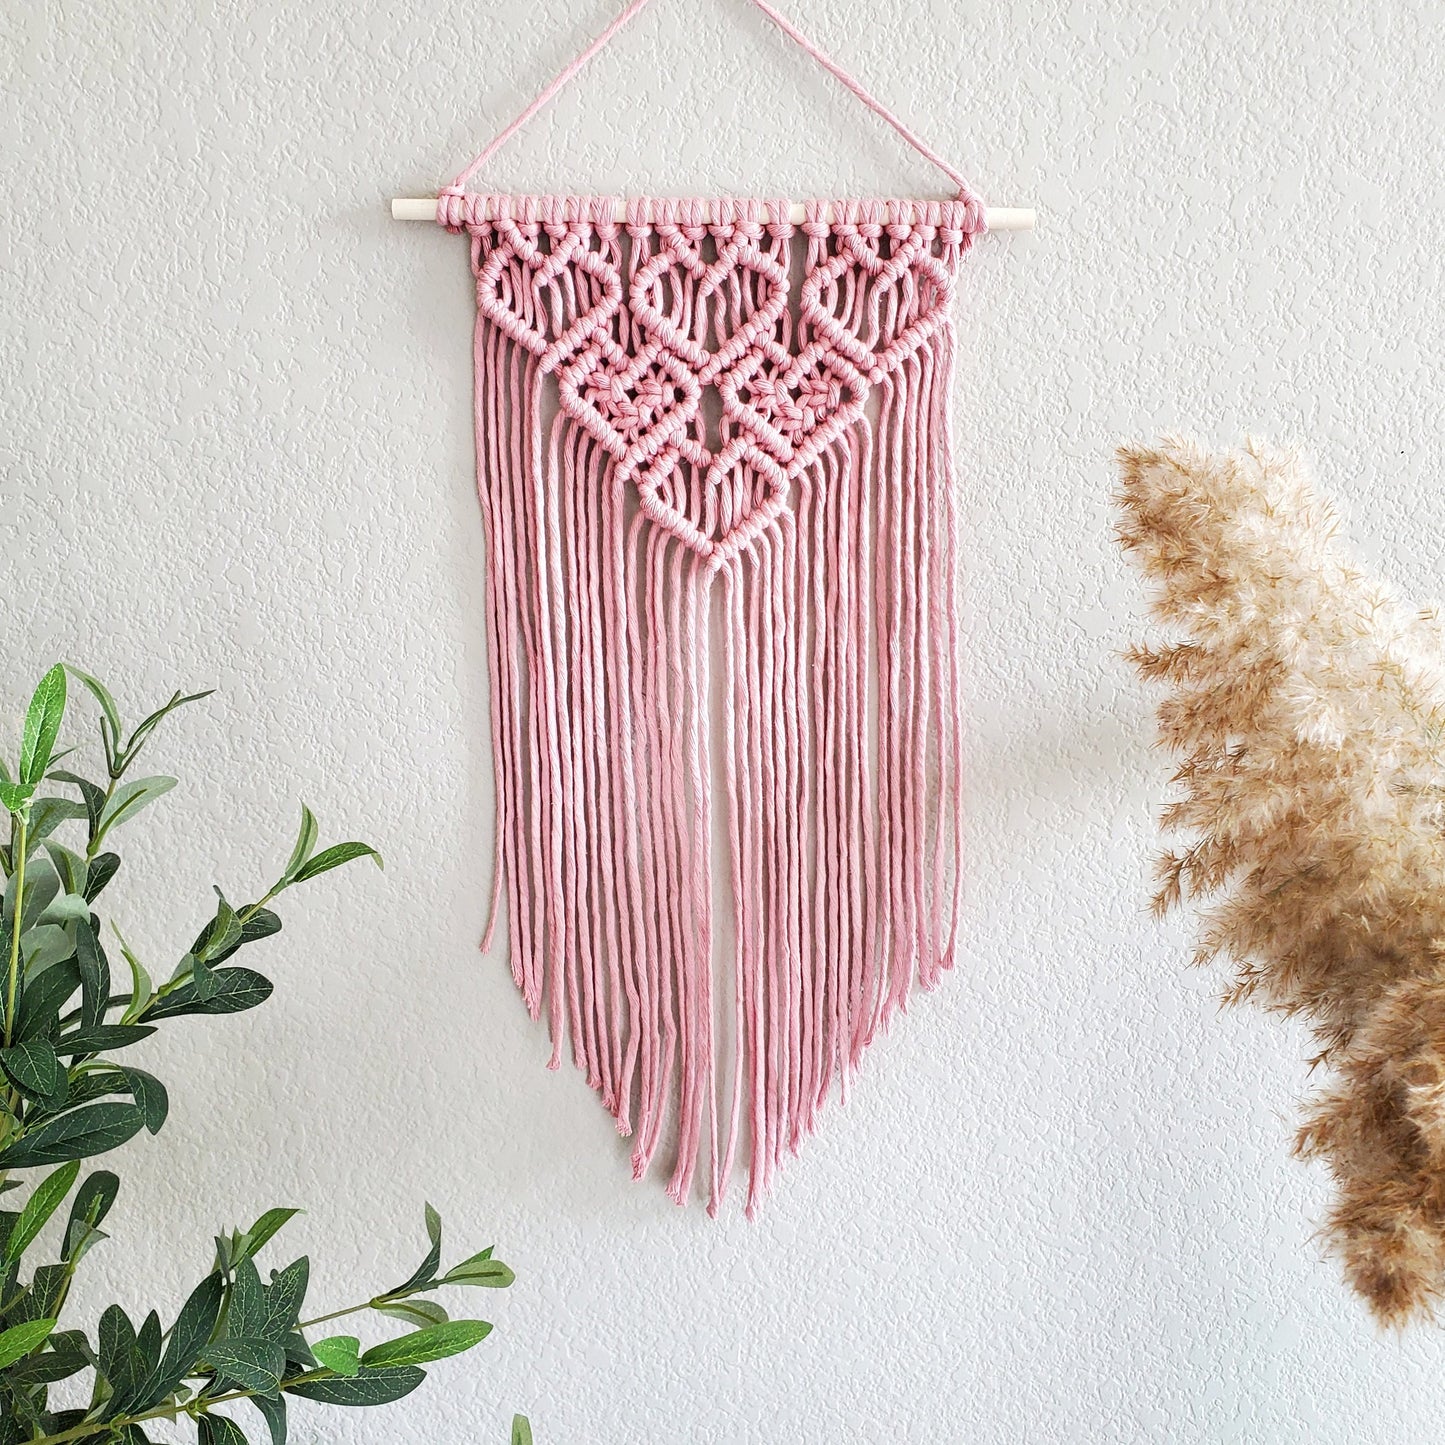 Macrame wall hanging pdf pattern, step by step guide, macrame tutorial, valentines day heart craft, diy macrame